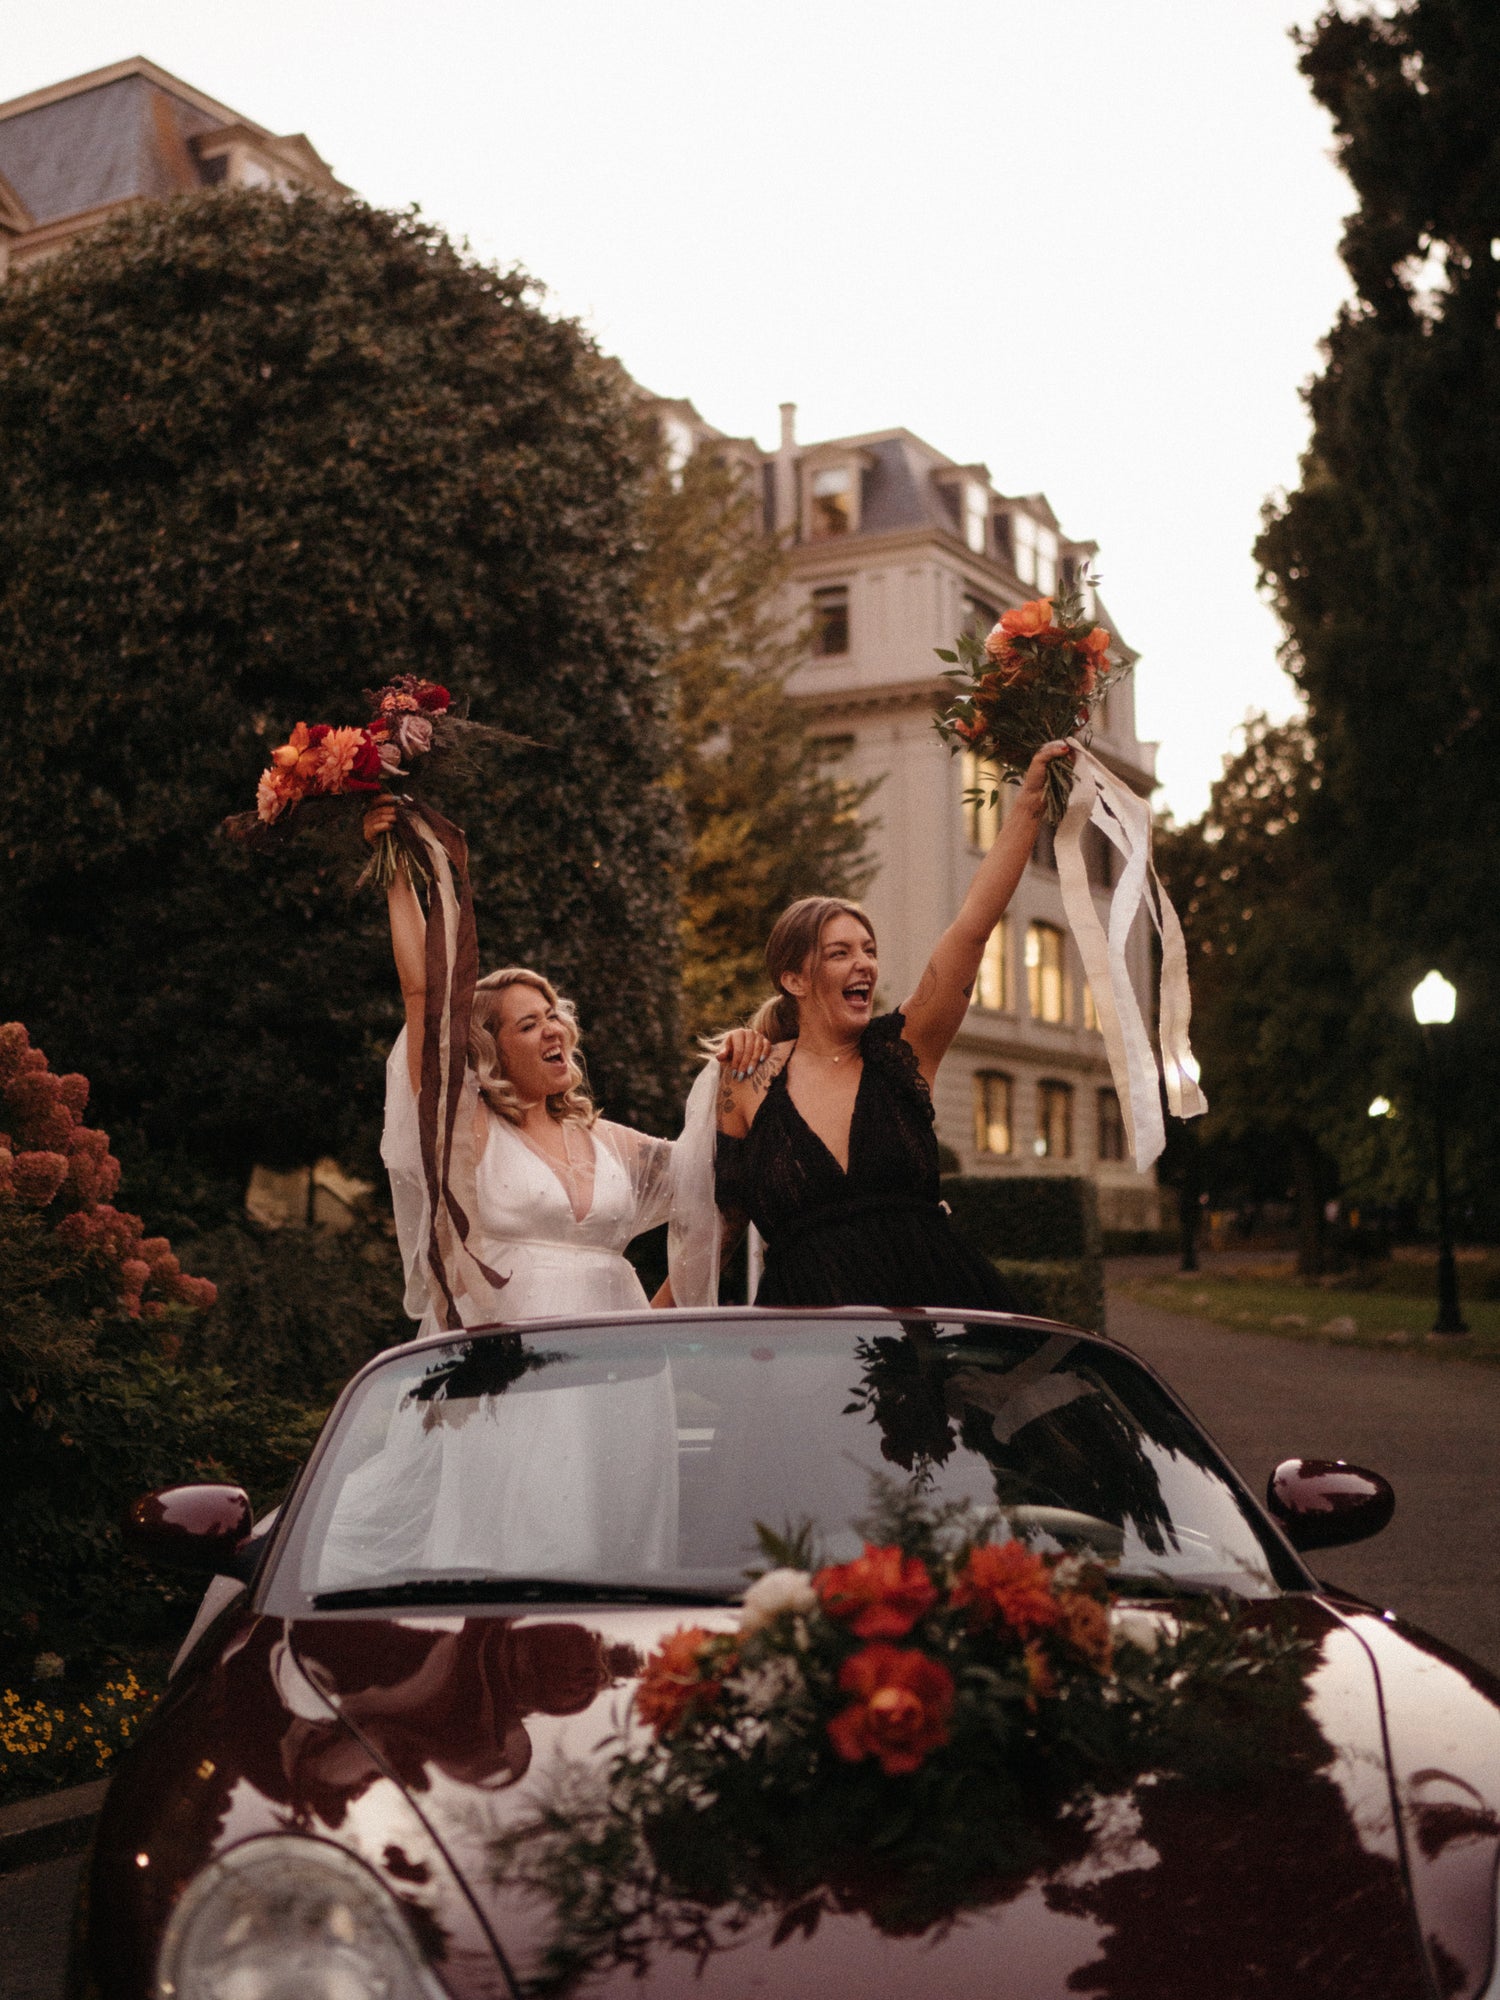 two brides cheering with their bouquets in the air standing in a convertible car